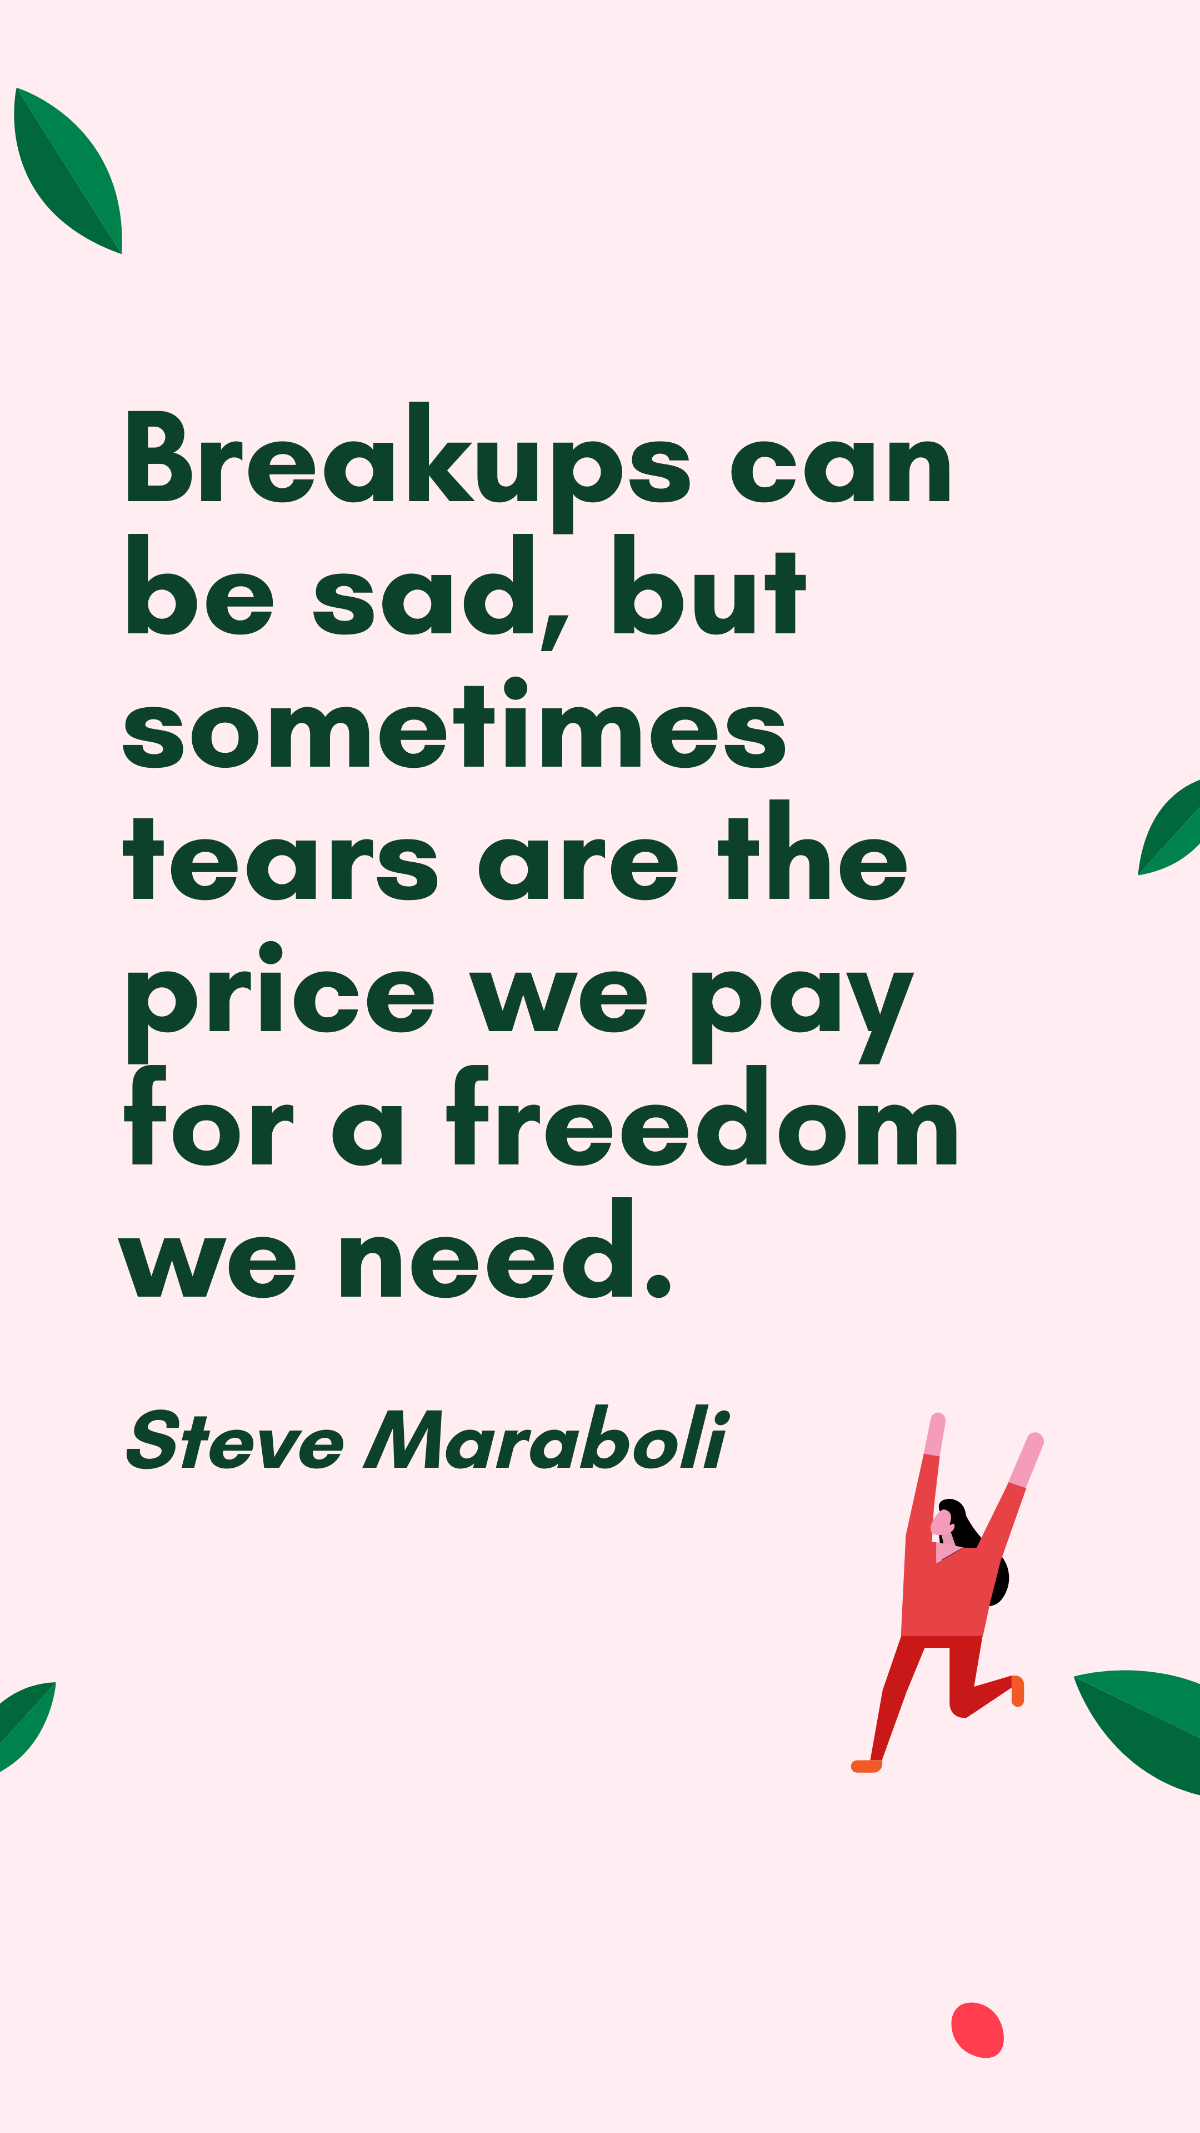 Steve Maraboli - Breakups can be sad, but sometimes tears are the price we pay for a freedom we need. Template